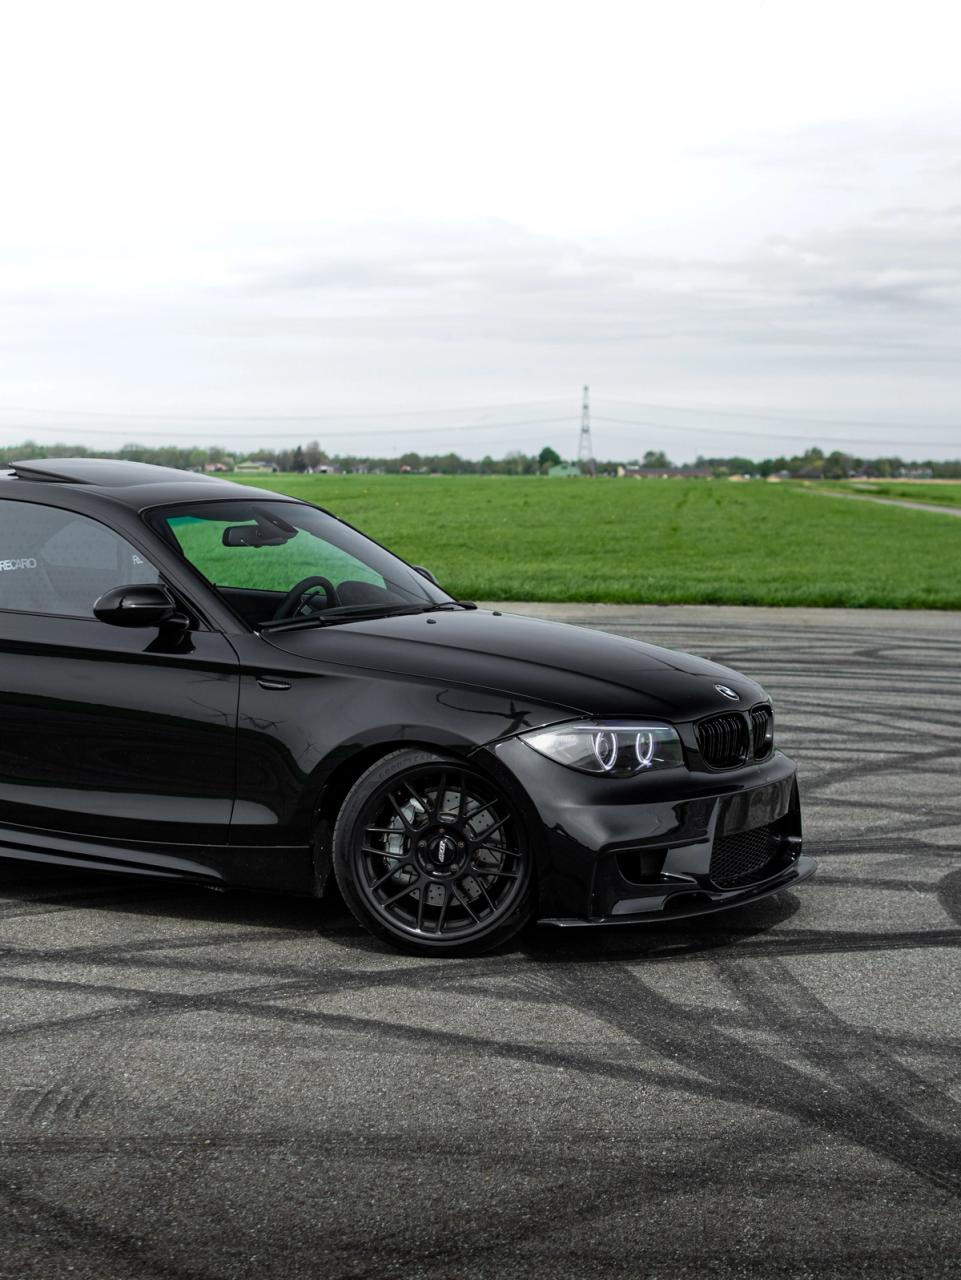 BMW E82 Coupe 1 Series with 18" ARC-8 in Satin Black